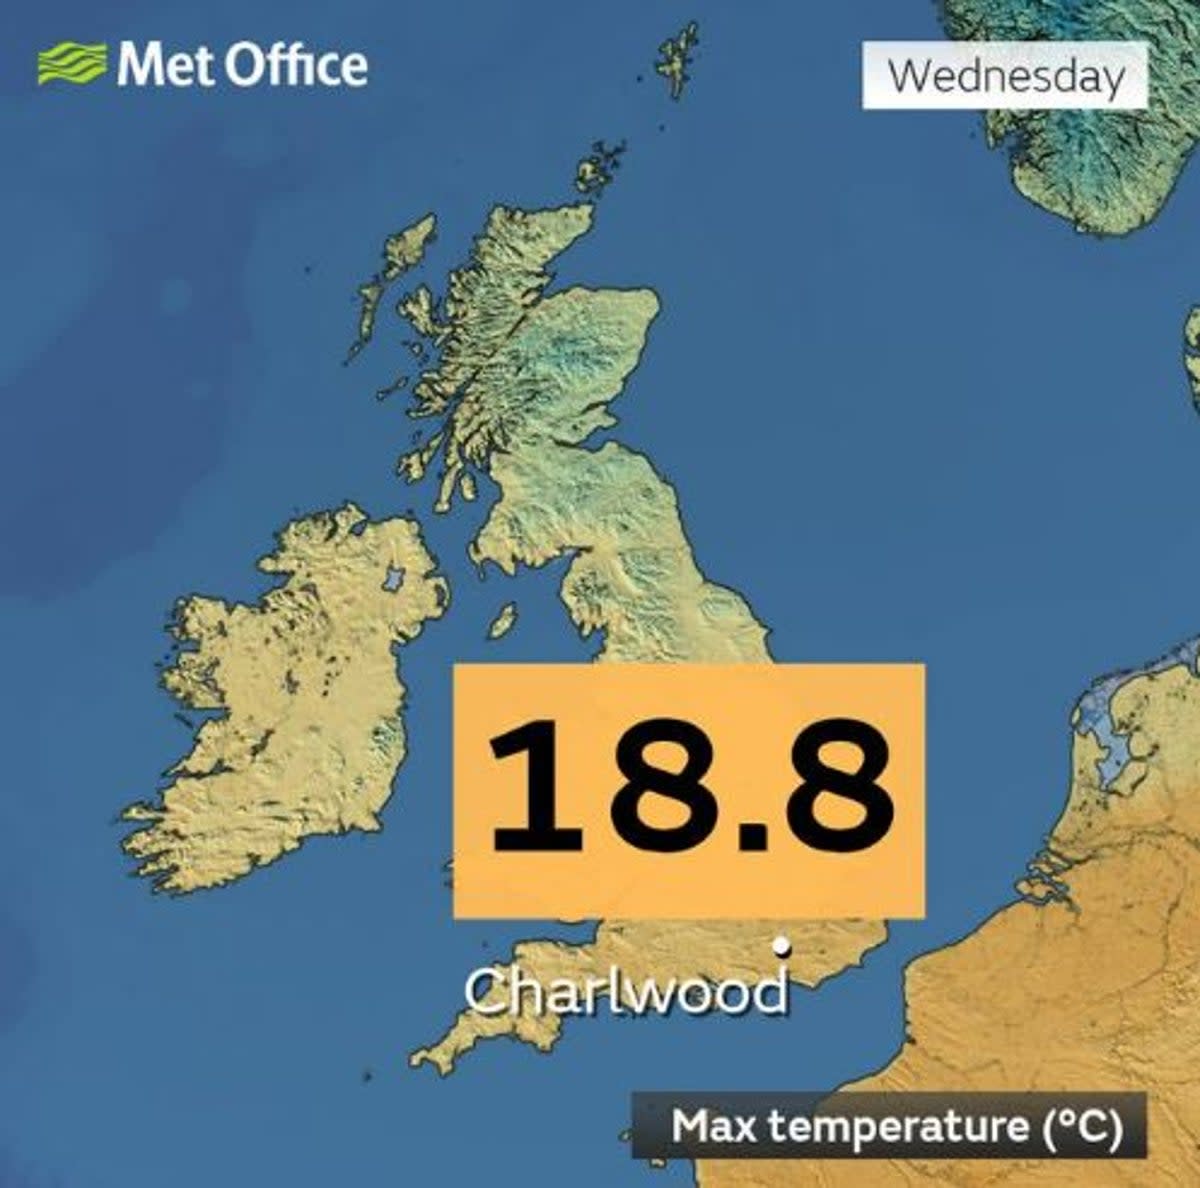 The damp forecast comes after the UK experienced temperatures topping 18C on the first day of spring (MET OFFICE)